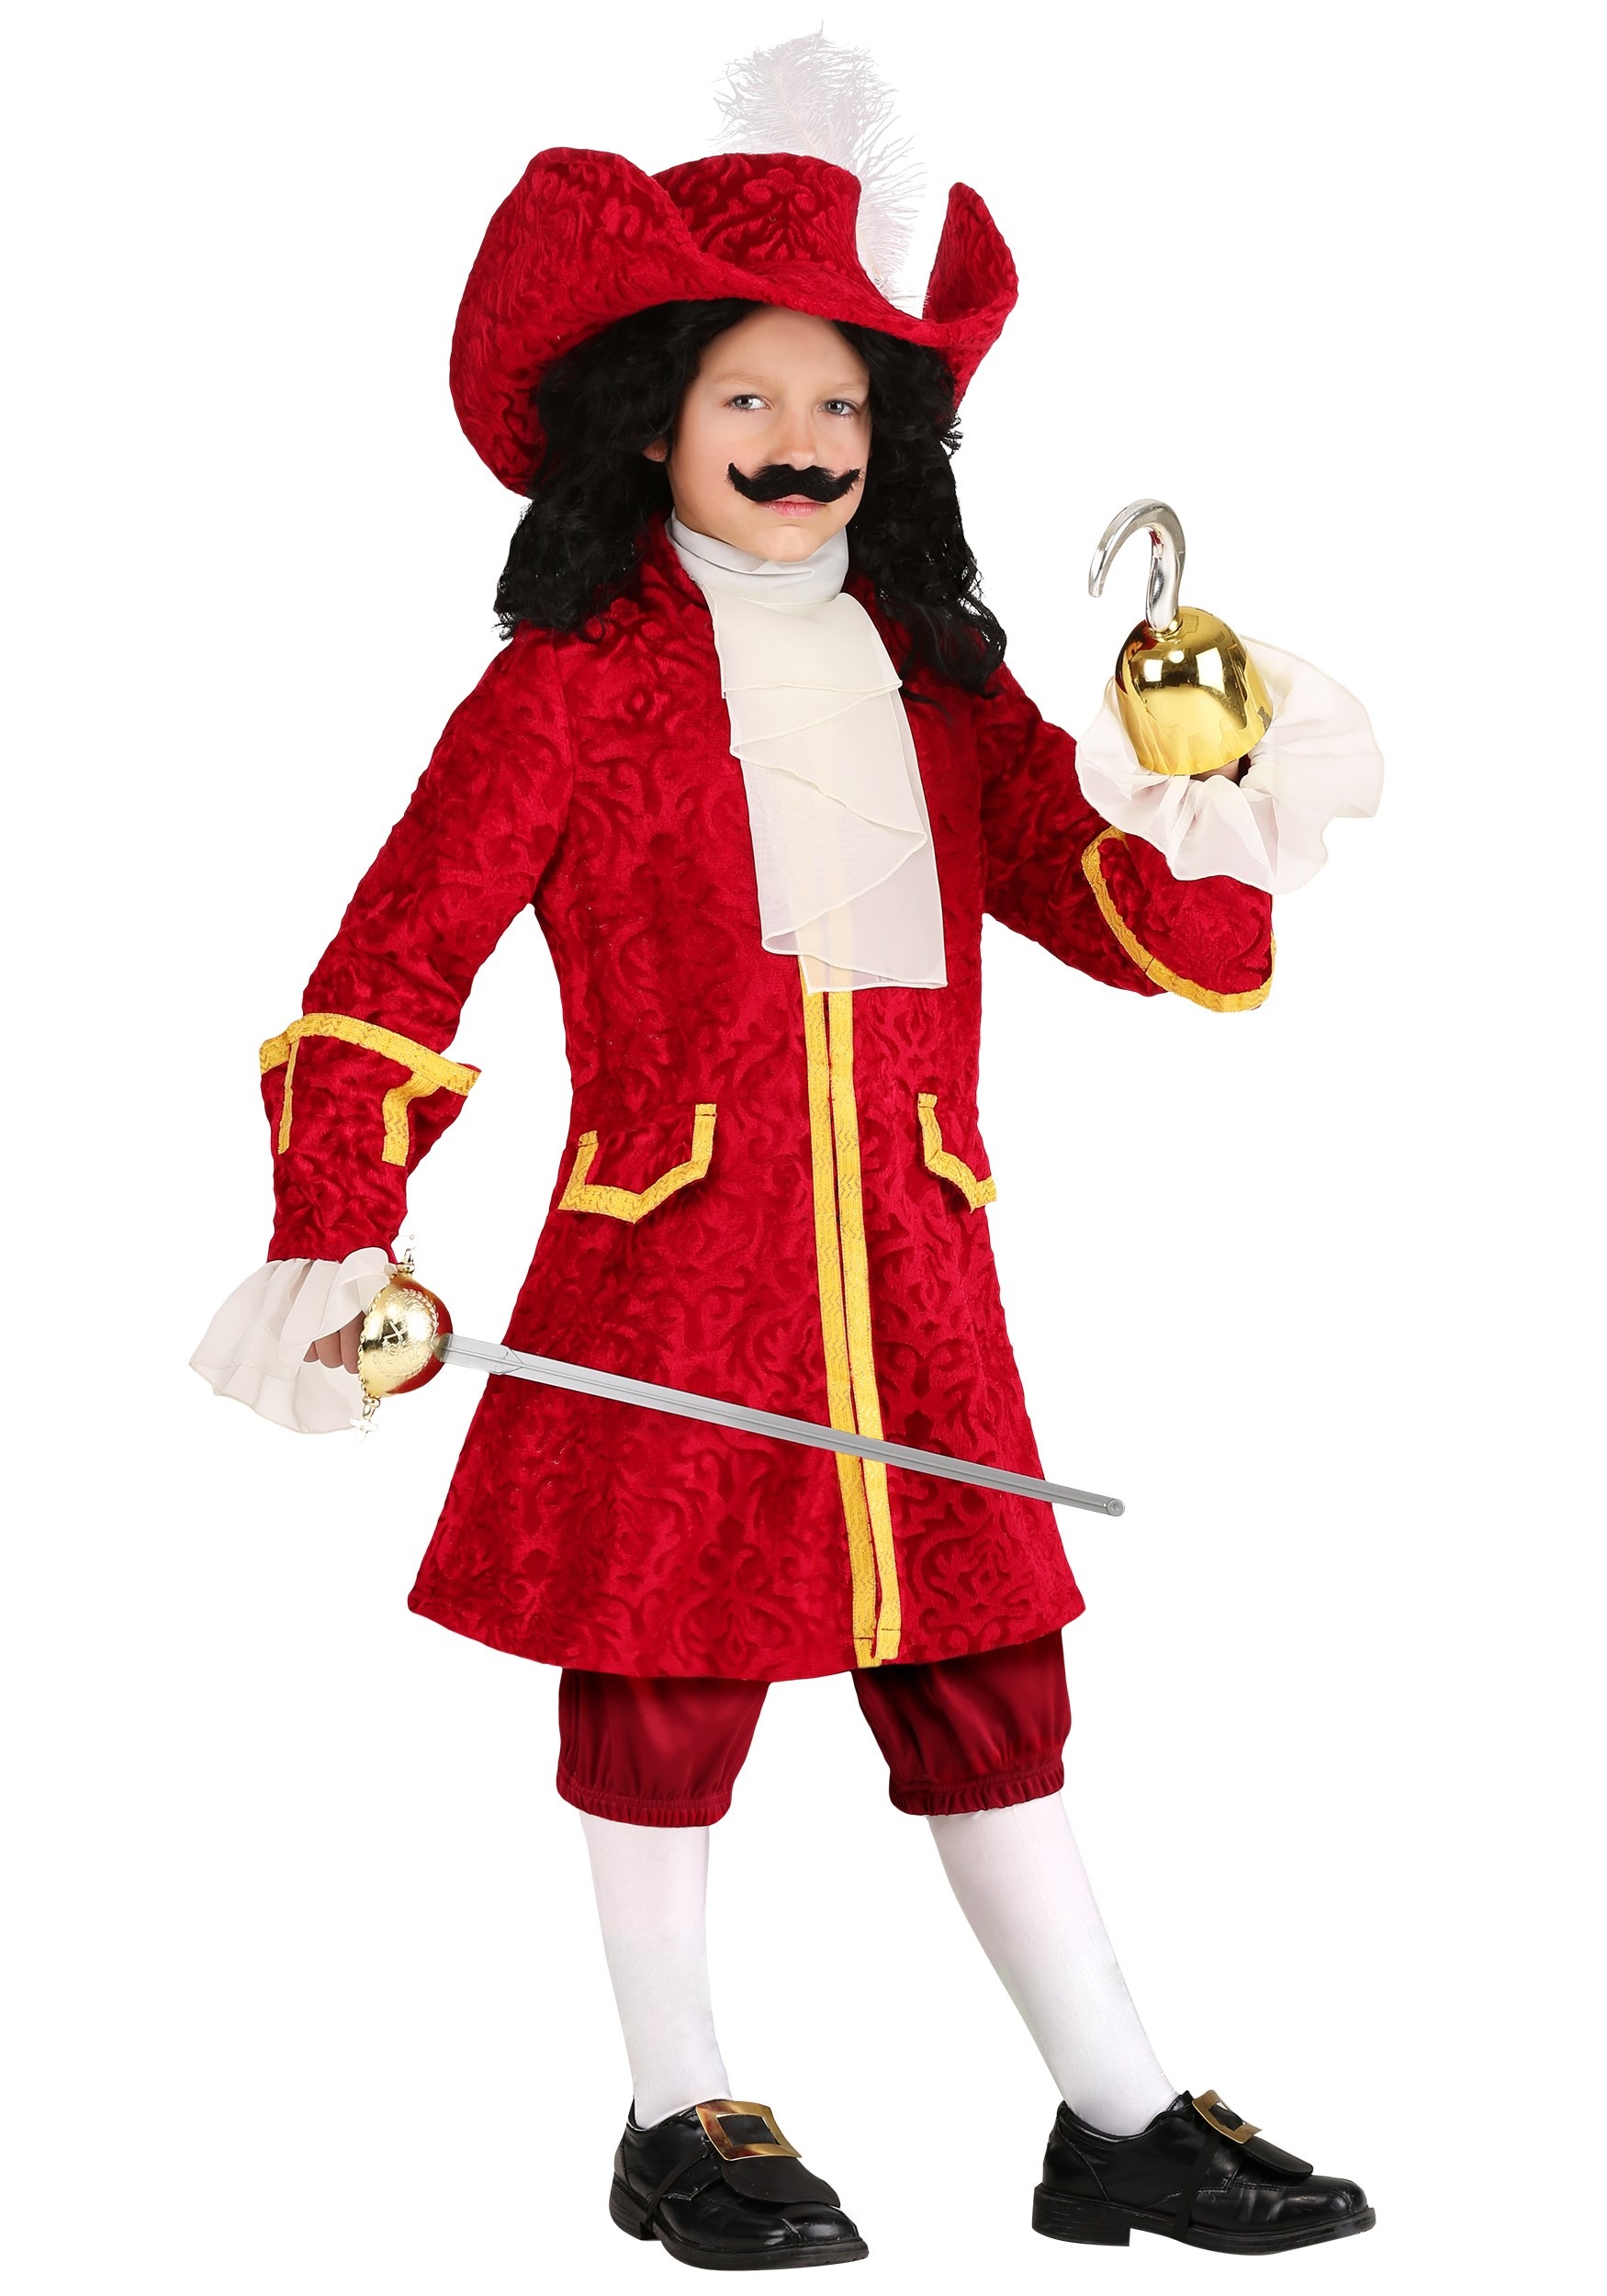 https://images.fun.com/products/63780/1-1/-kids-captain-hook-deluxe-costume-.jpg